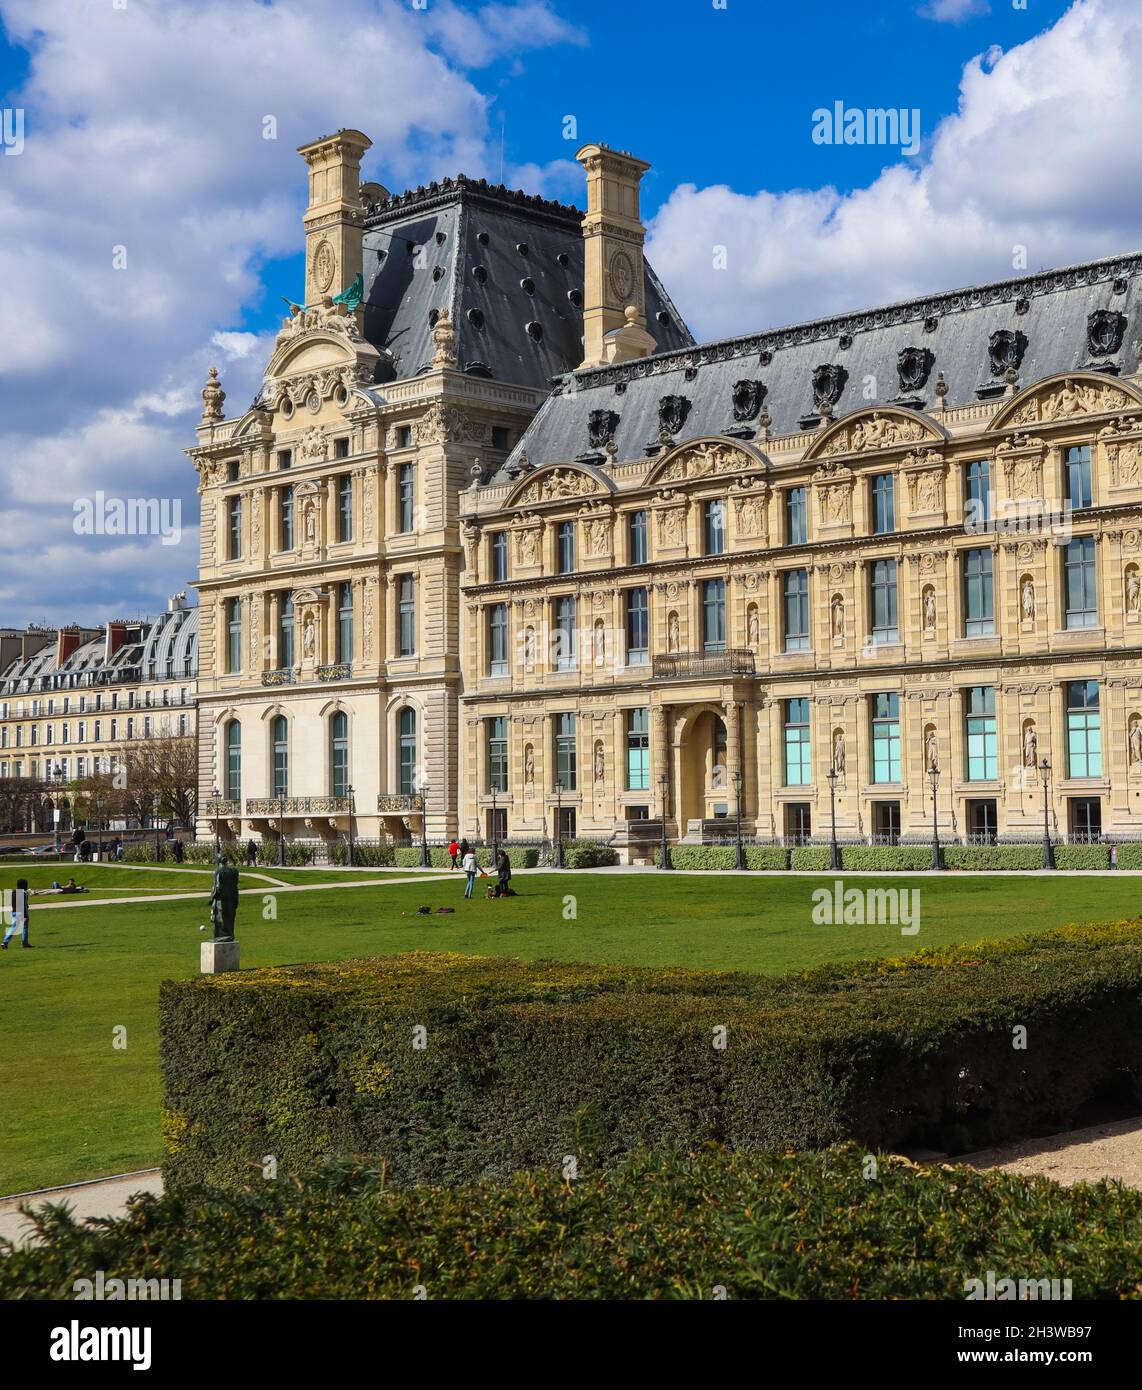 Marvelous Tuileries garden of Louvre Palace in spring. Paris France. April 2019 Stock Photo